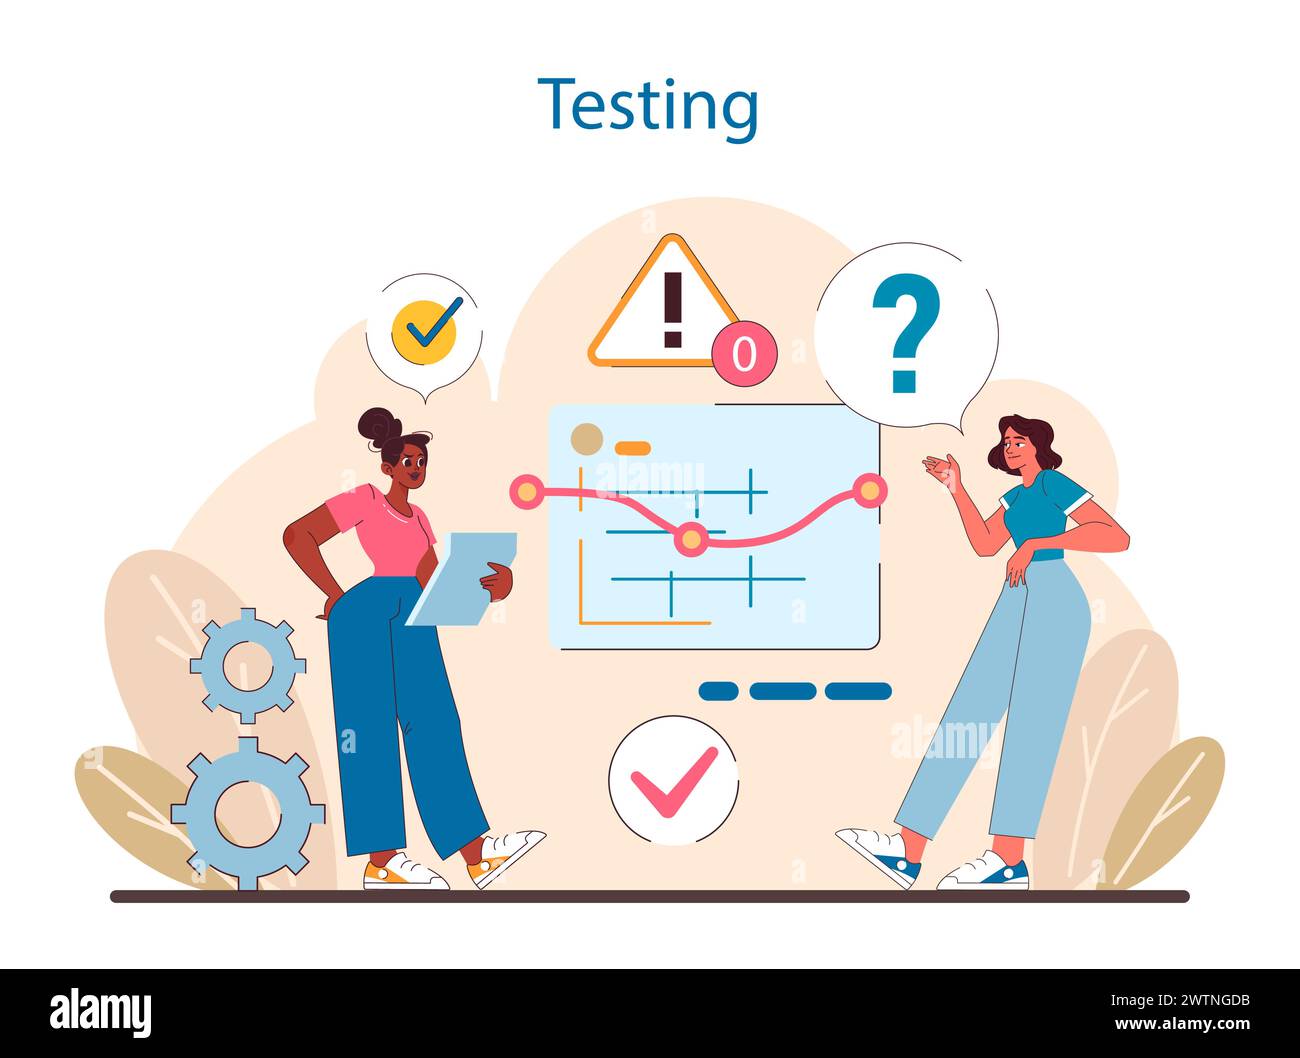 Testing stage in IT project management. Highlights the critical evaluation of software functionality, identifying bugs, and ensuring product quality before deployment. Flat vector illustration. Stock Vector